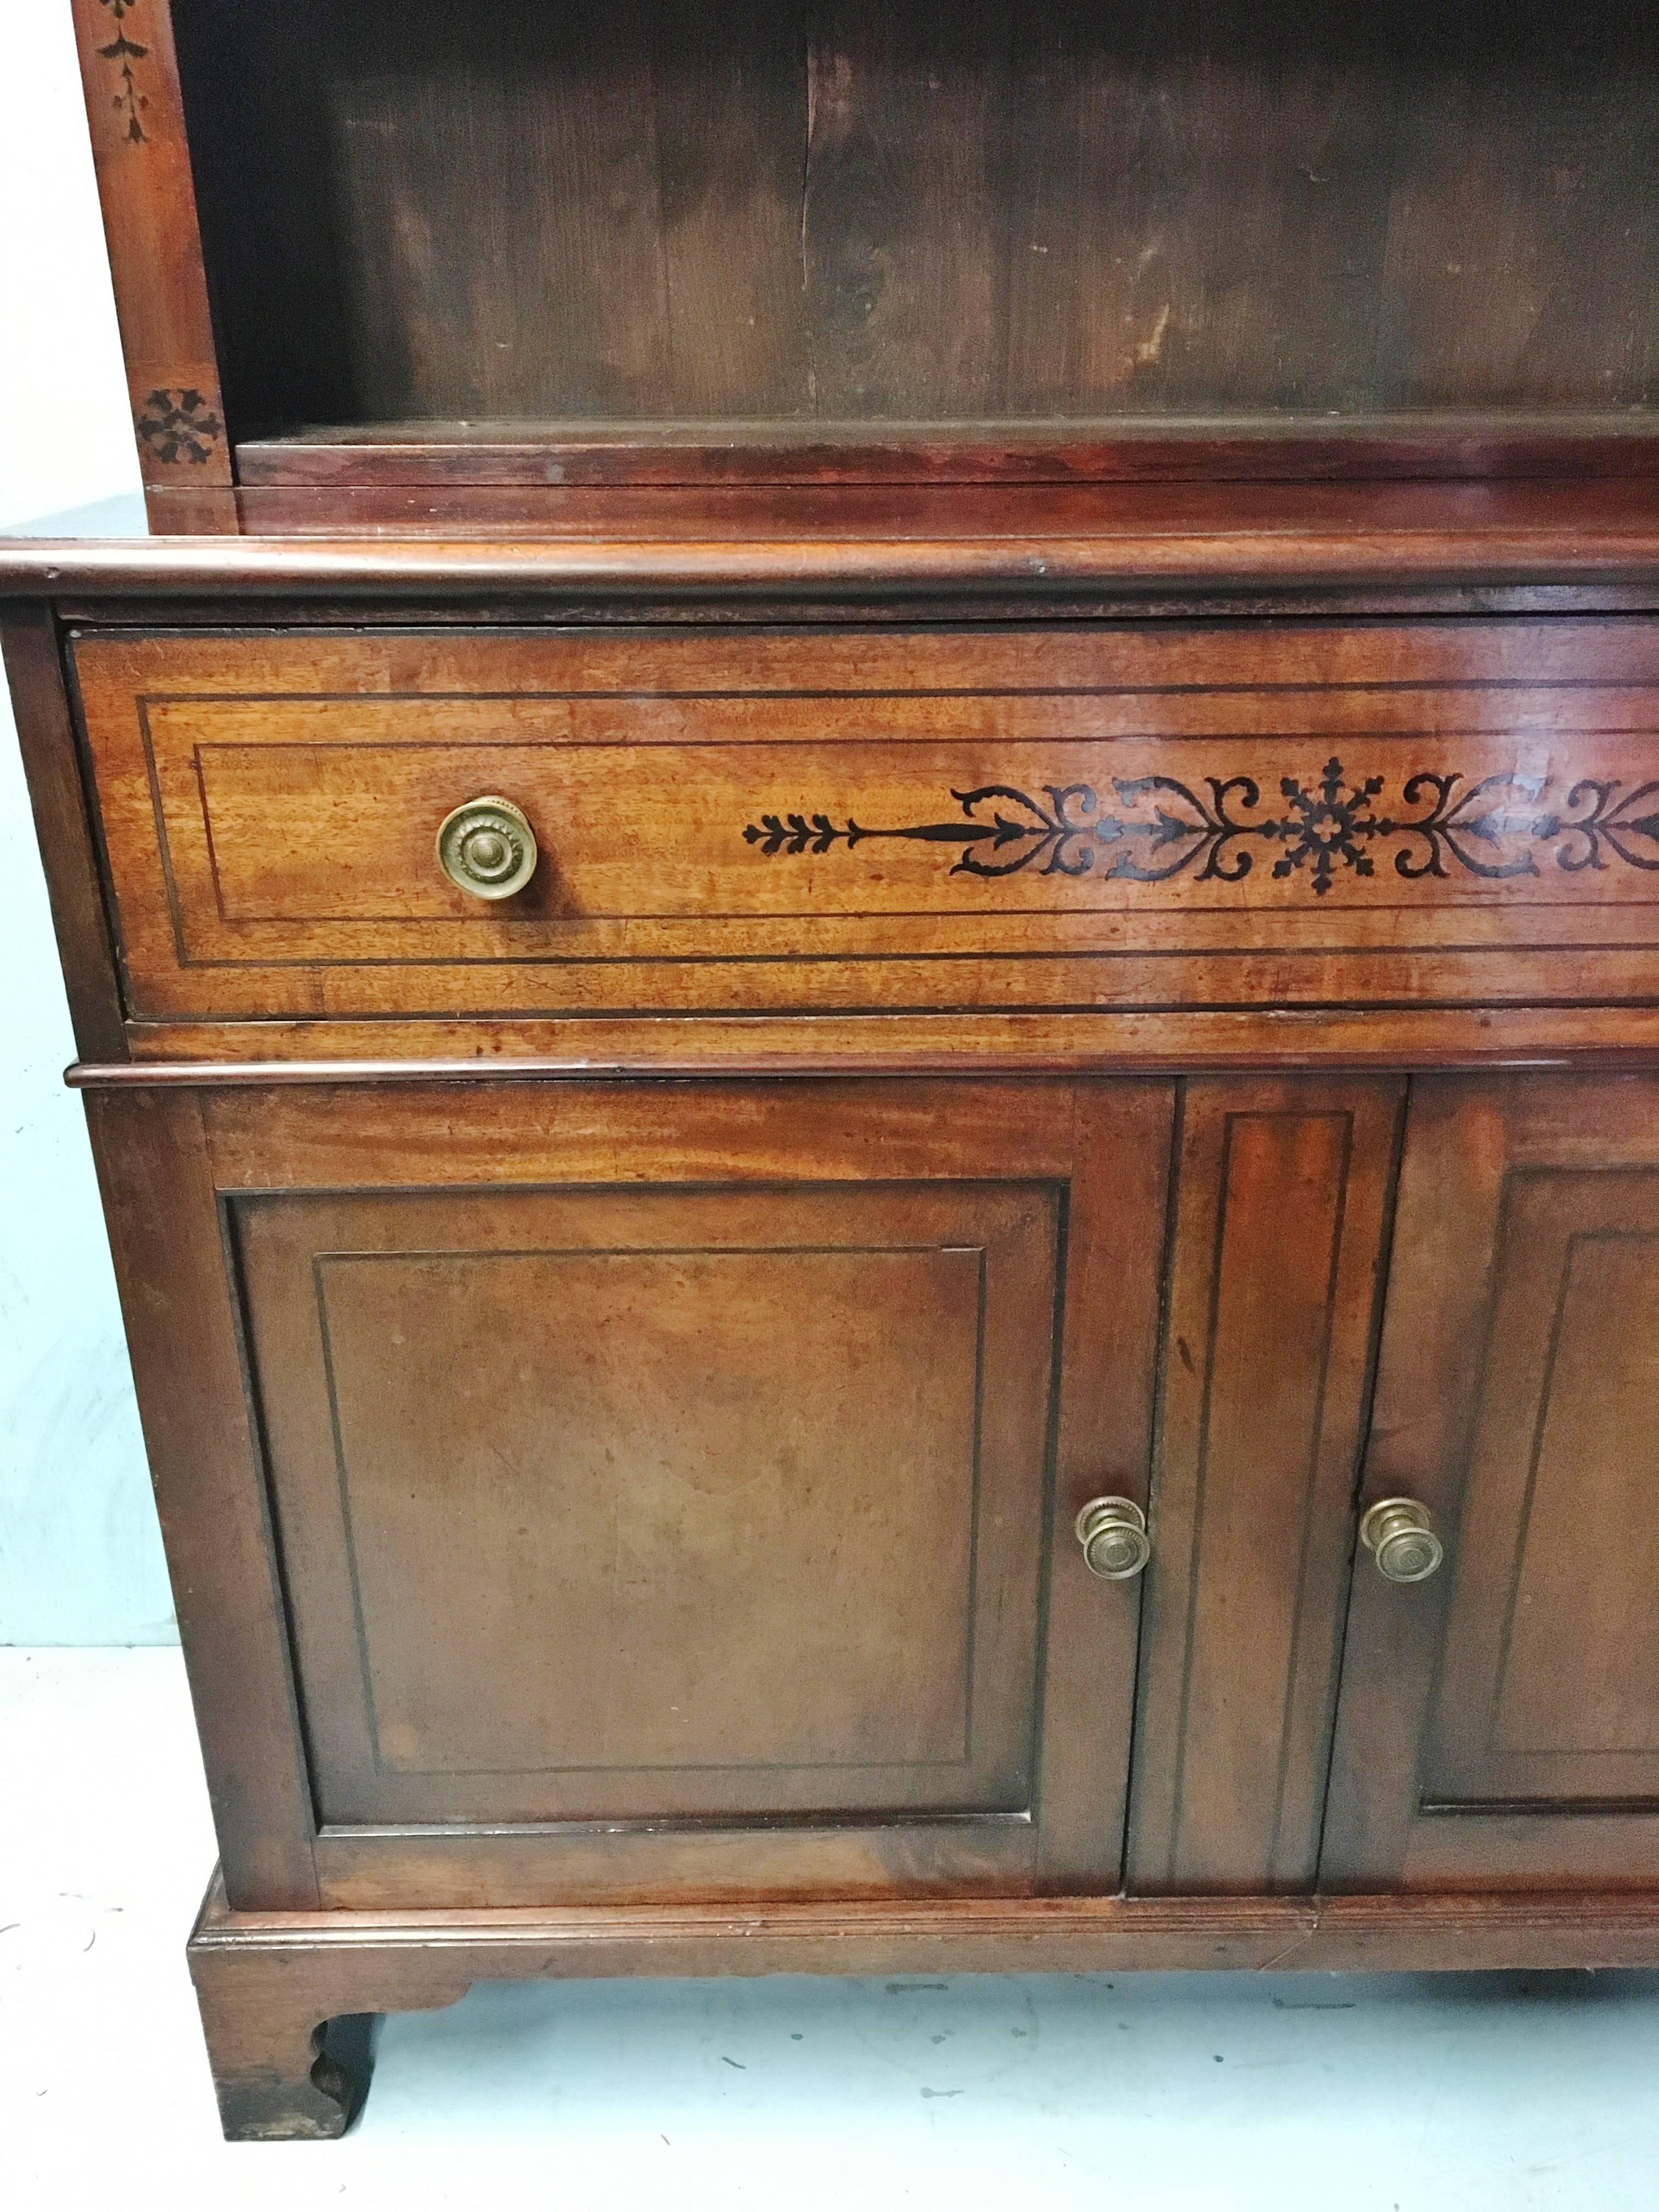 A good early 19th century two section mahogany dresser, sideboard, with inlaid ebony decoration. Standing on bracket feet with two doors below one large central drawer, the finish is excellent and retains a rich antique patination.

There are two